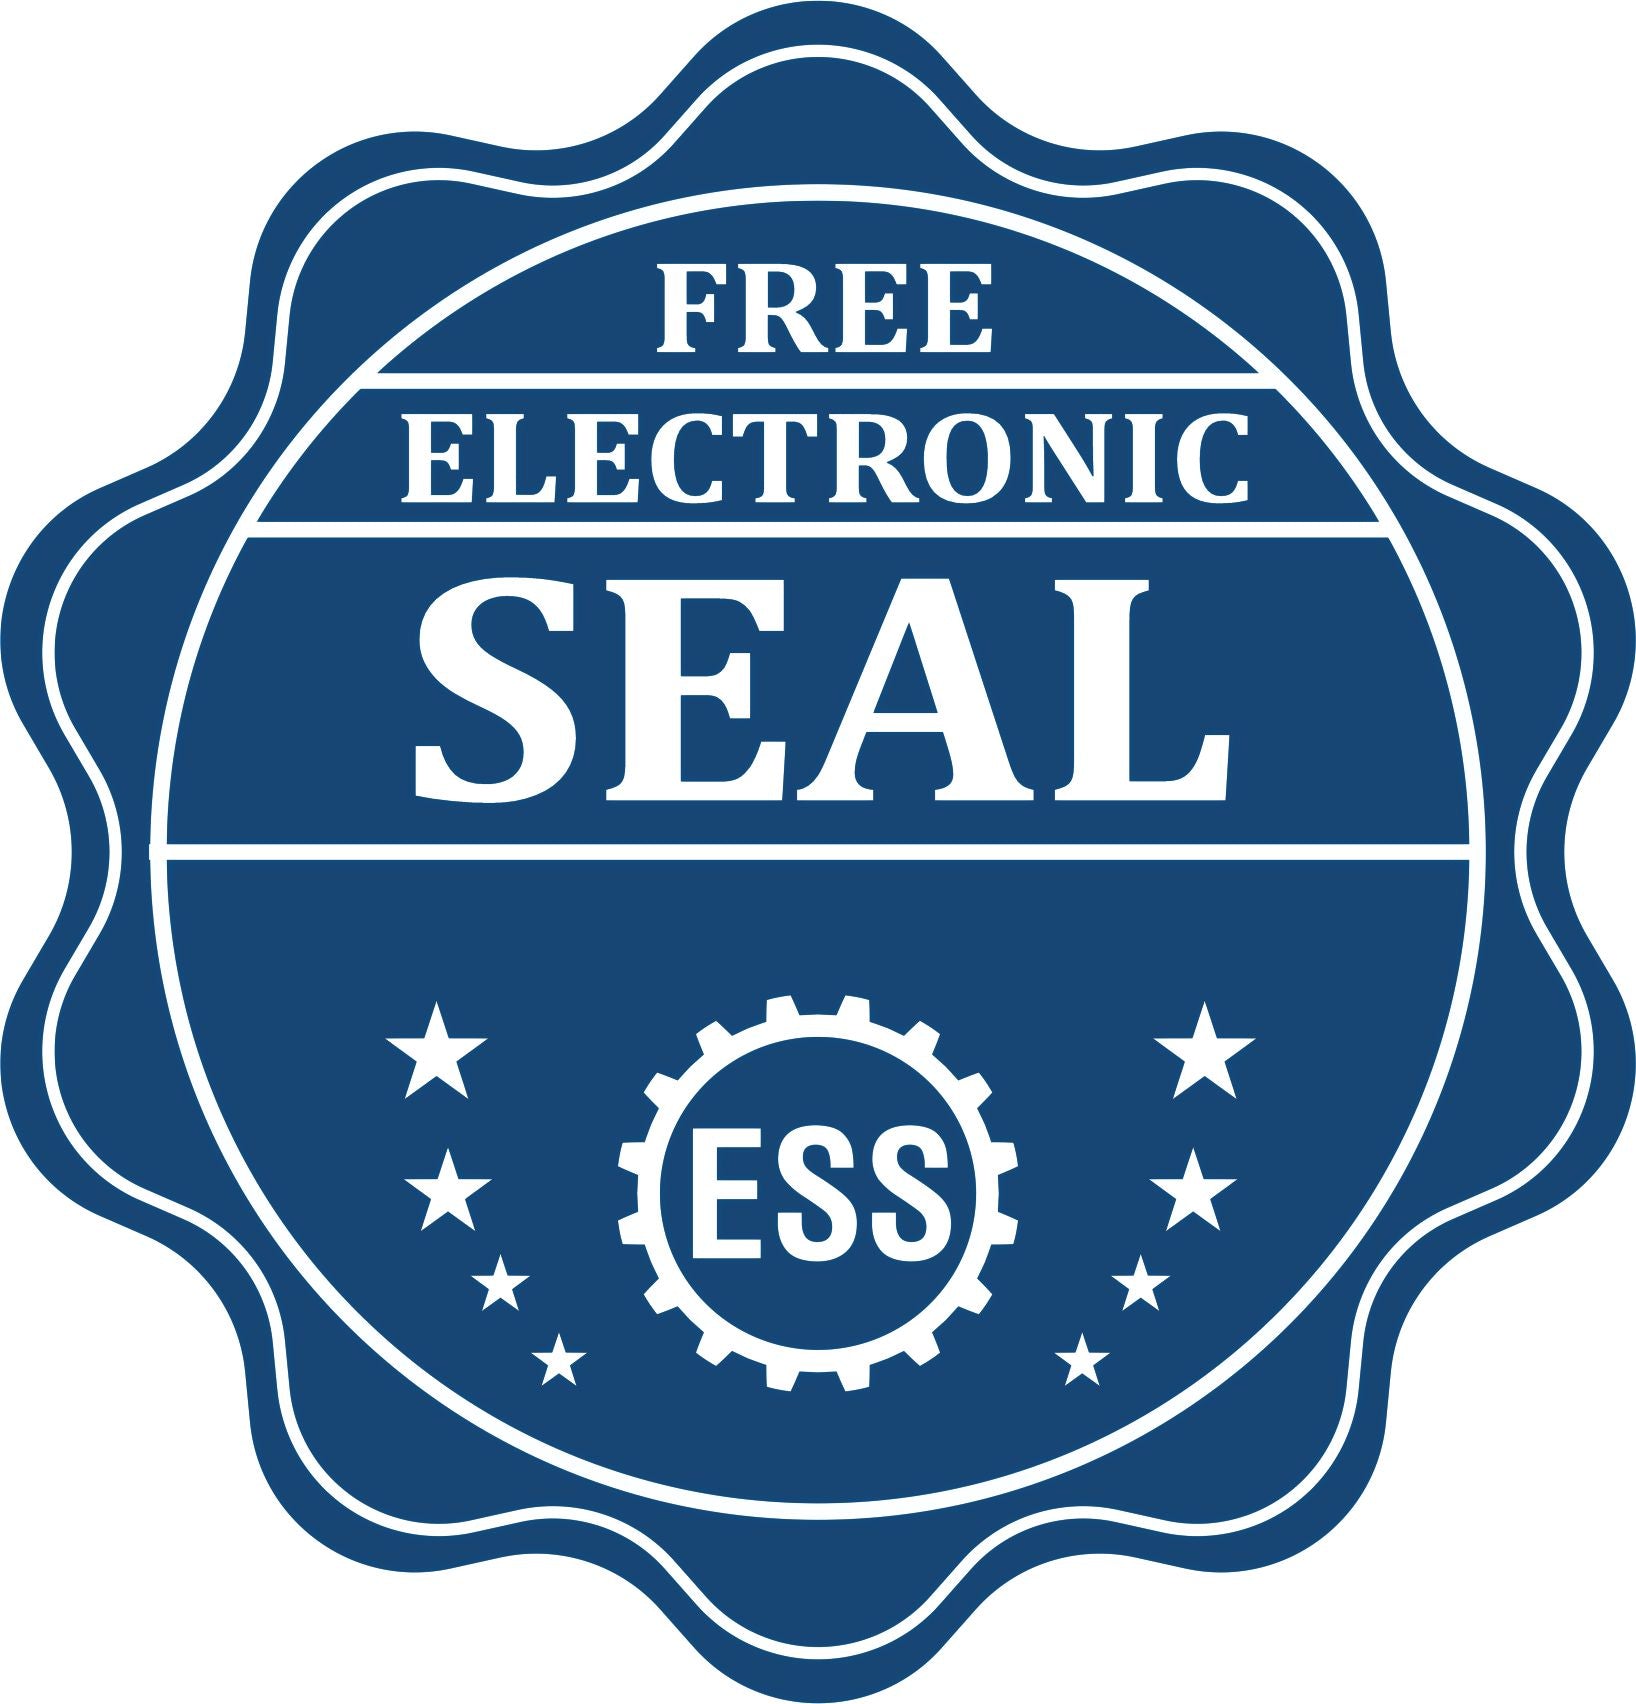 A badge showing a free electronic seal for the Hybrid Virginia Geologist Seal with stars and the ESS gear on the emblem.